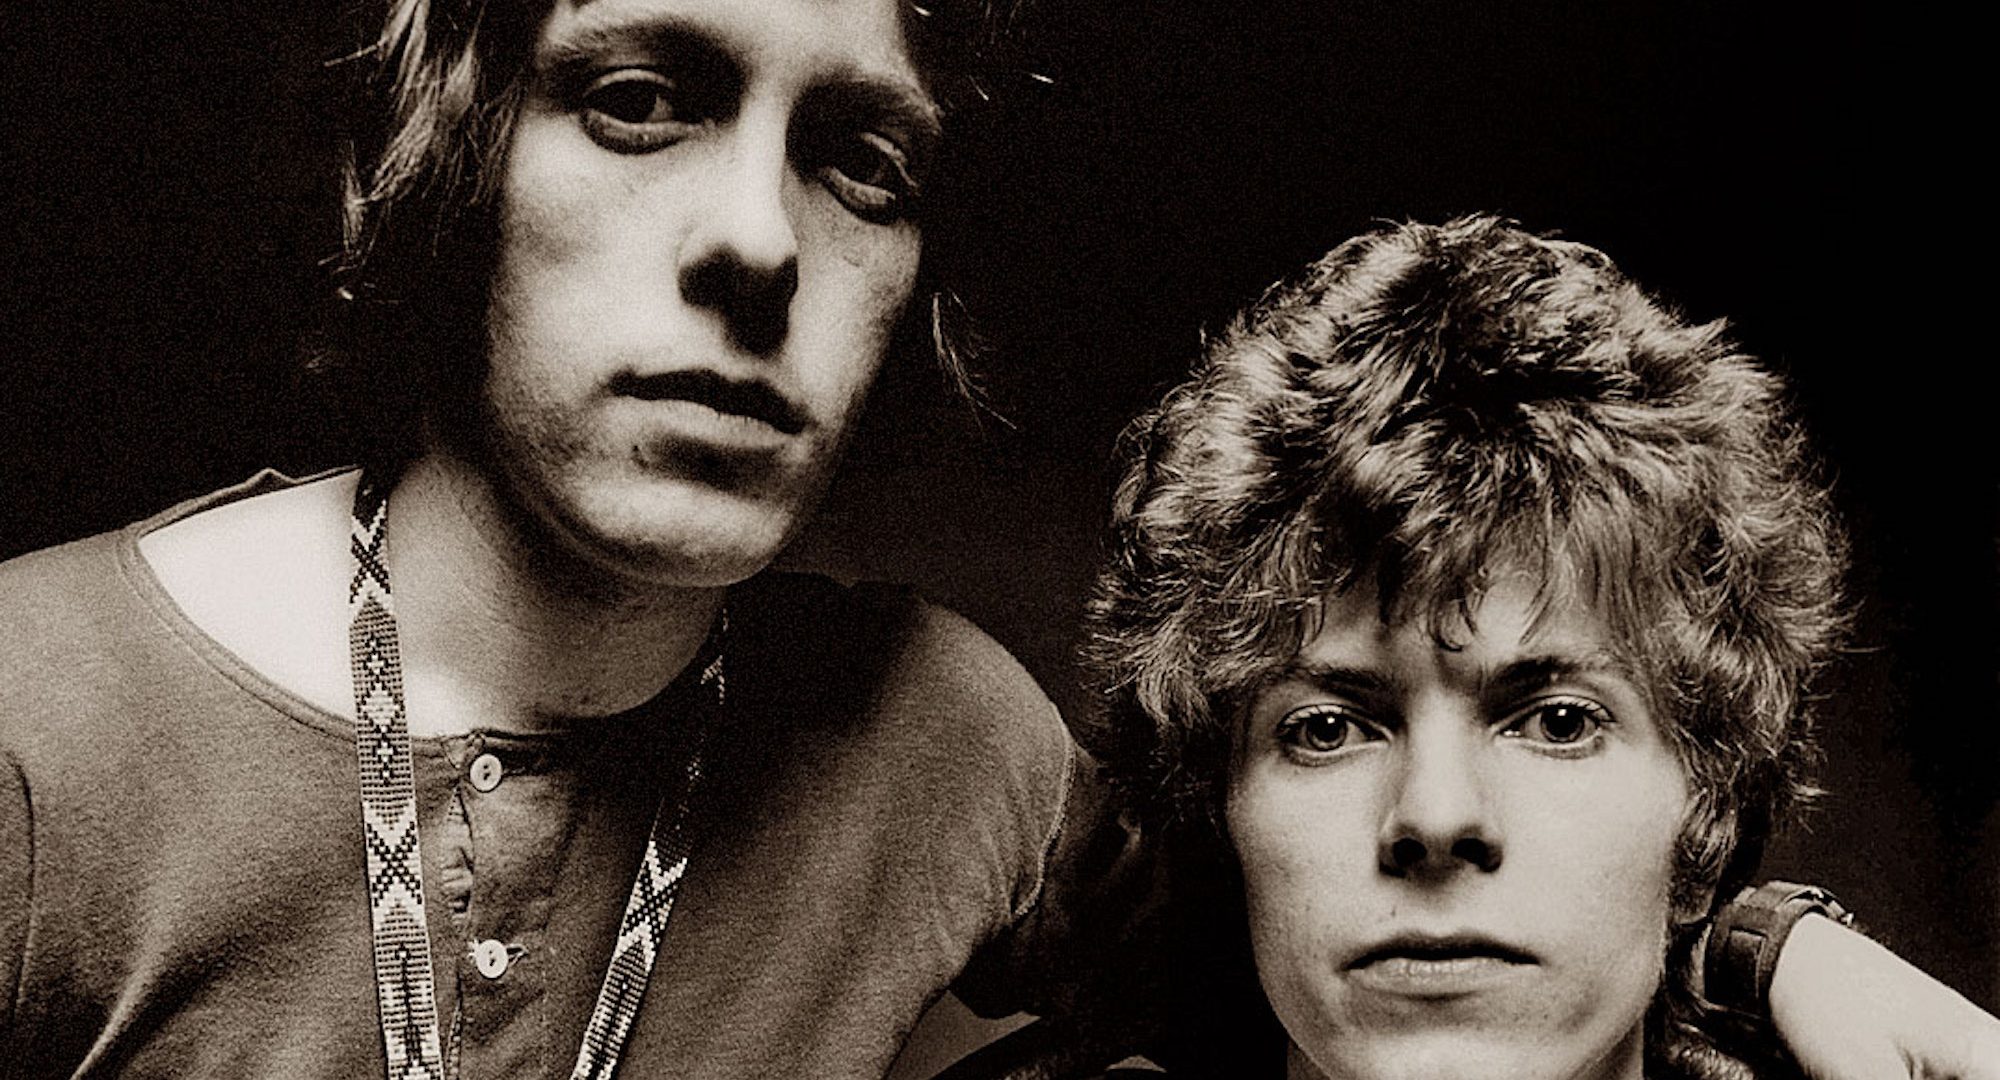 Bowie’s ‘Space Oddity’ Collaborator, Early Bandmate John Hutchinson Dies